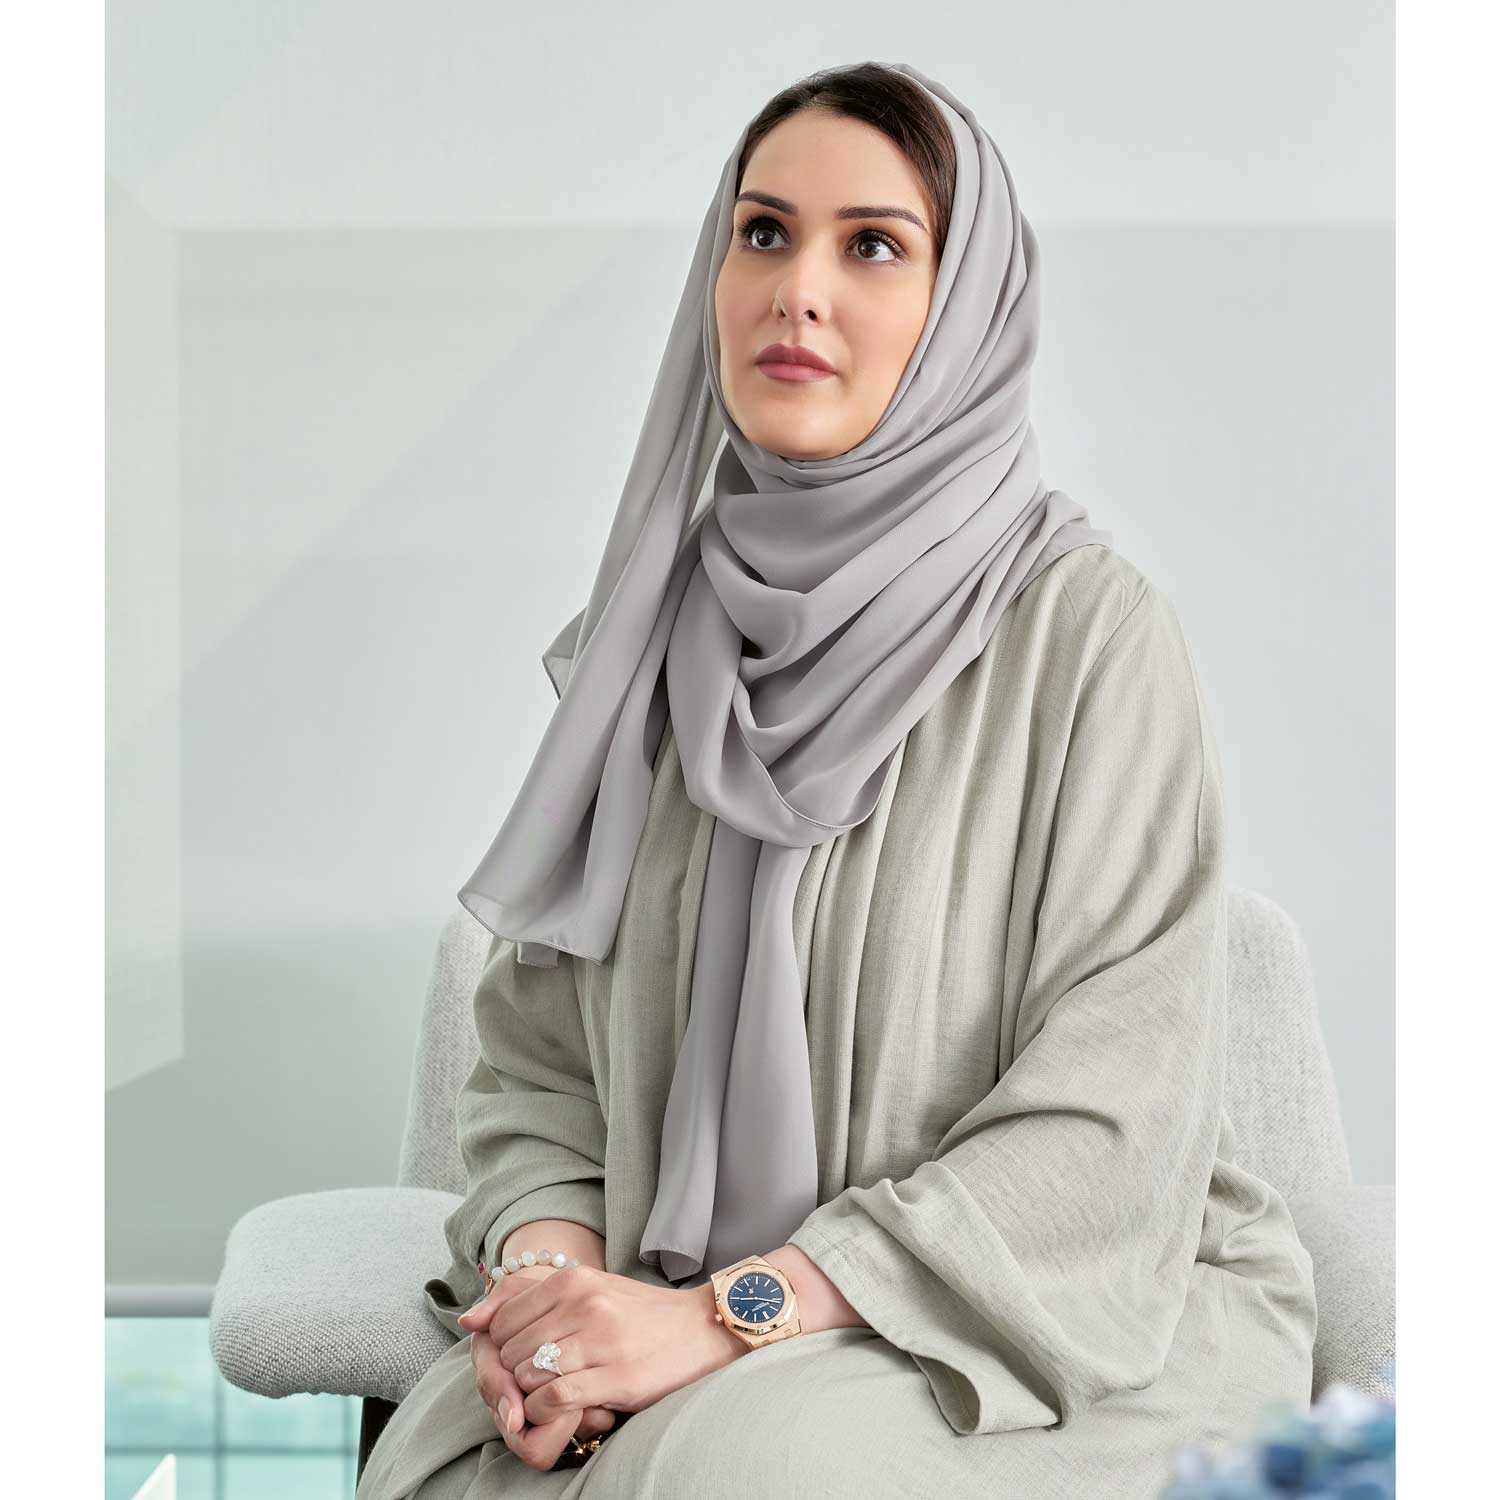 Hind Seddiqi would like to encourage women in the UAE to take the time to educate themselves about the watches they are looking to purchase